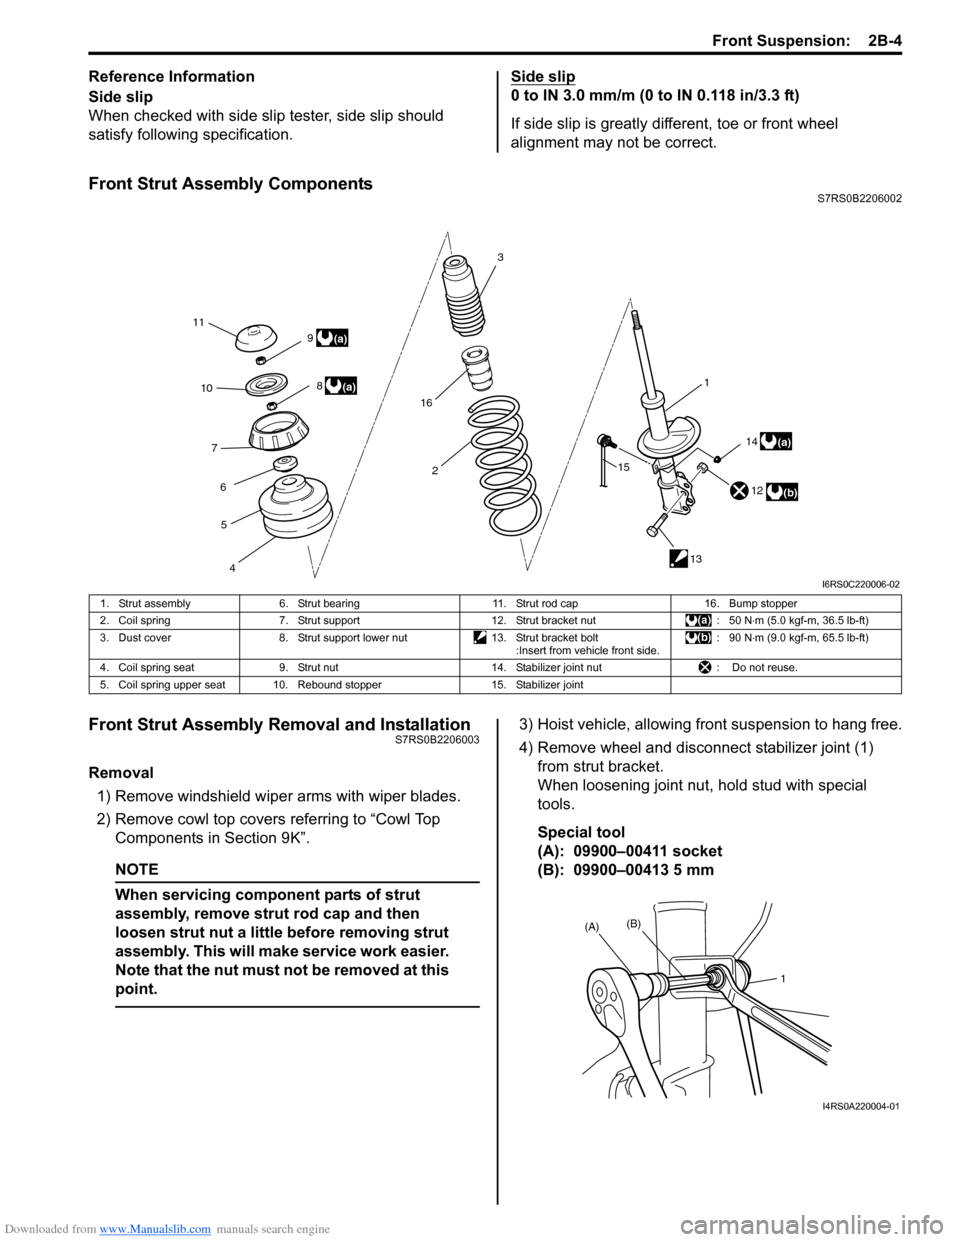 SUZUKI SWIFT 2005 2.G Service Workshop Manual Downloaded from www.Manualslib.com manuals search engine Front Suspension:  2B-4
Reference Information
Side slip
When checked with side slip tester, side slip should 
satisfy following specification.S